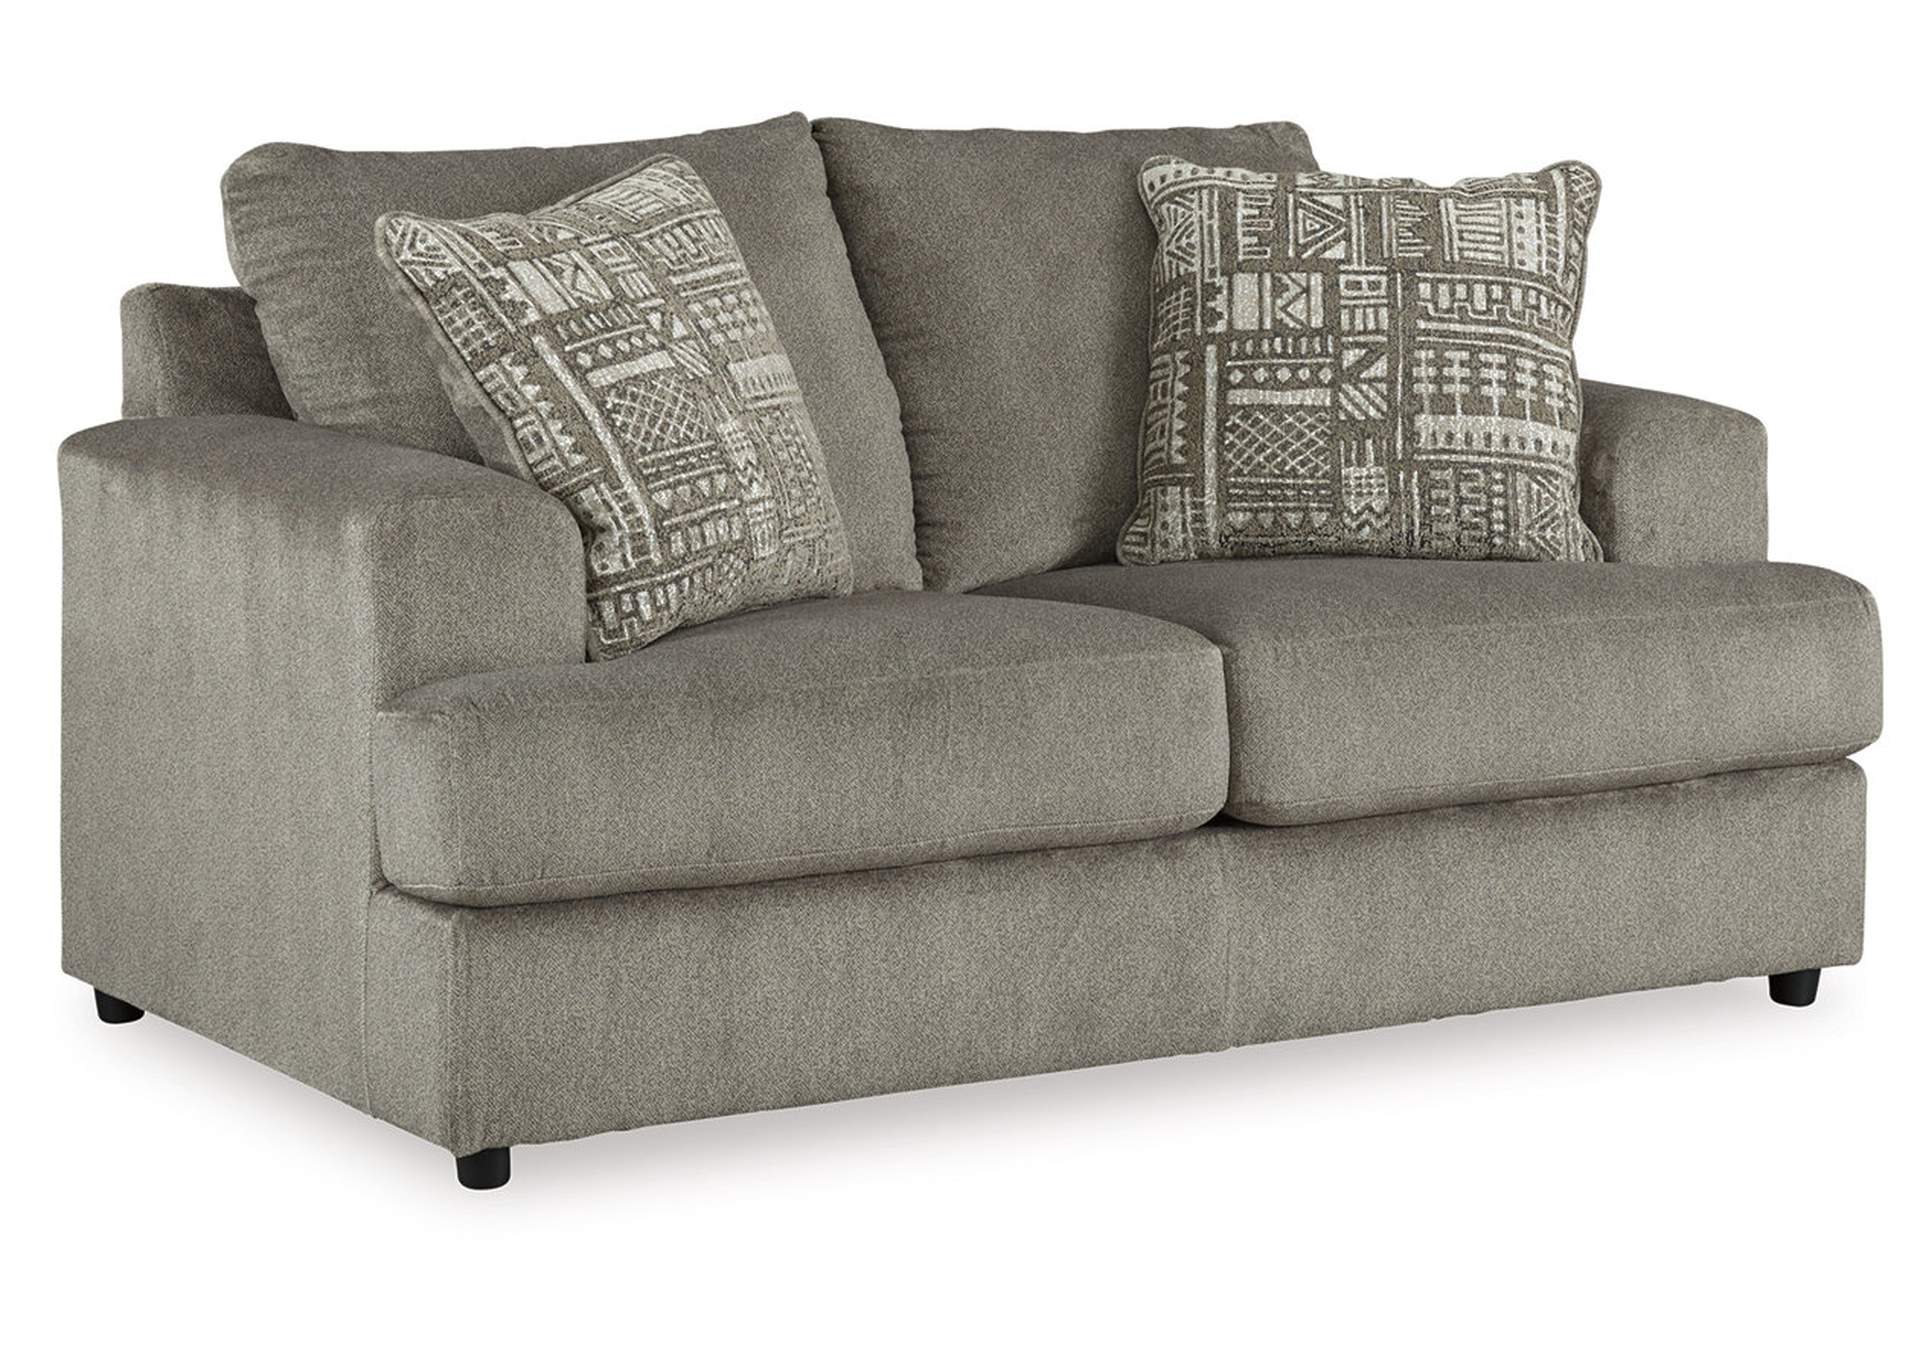 Soletren Queen Sofa Sleeper and 2 Loveseats,Signature Design By Ashley